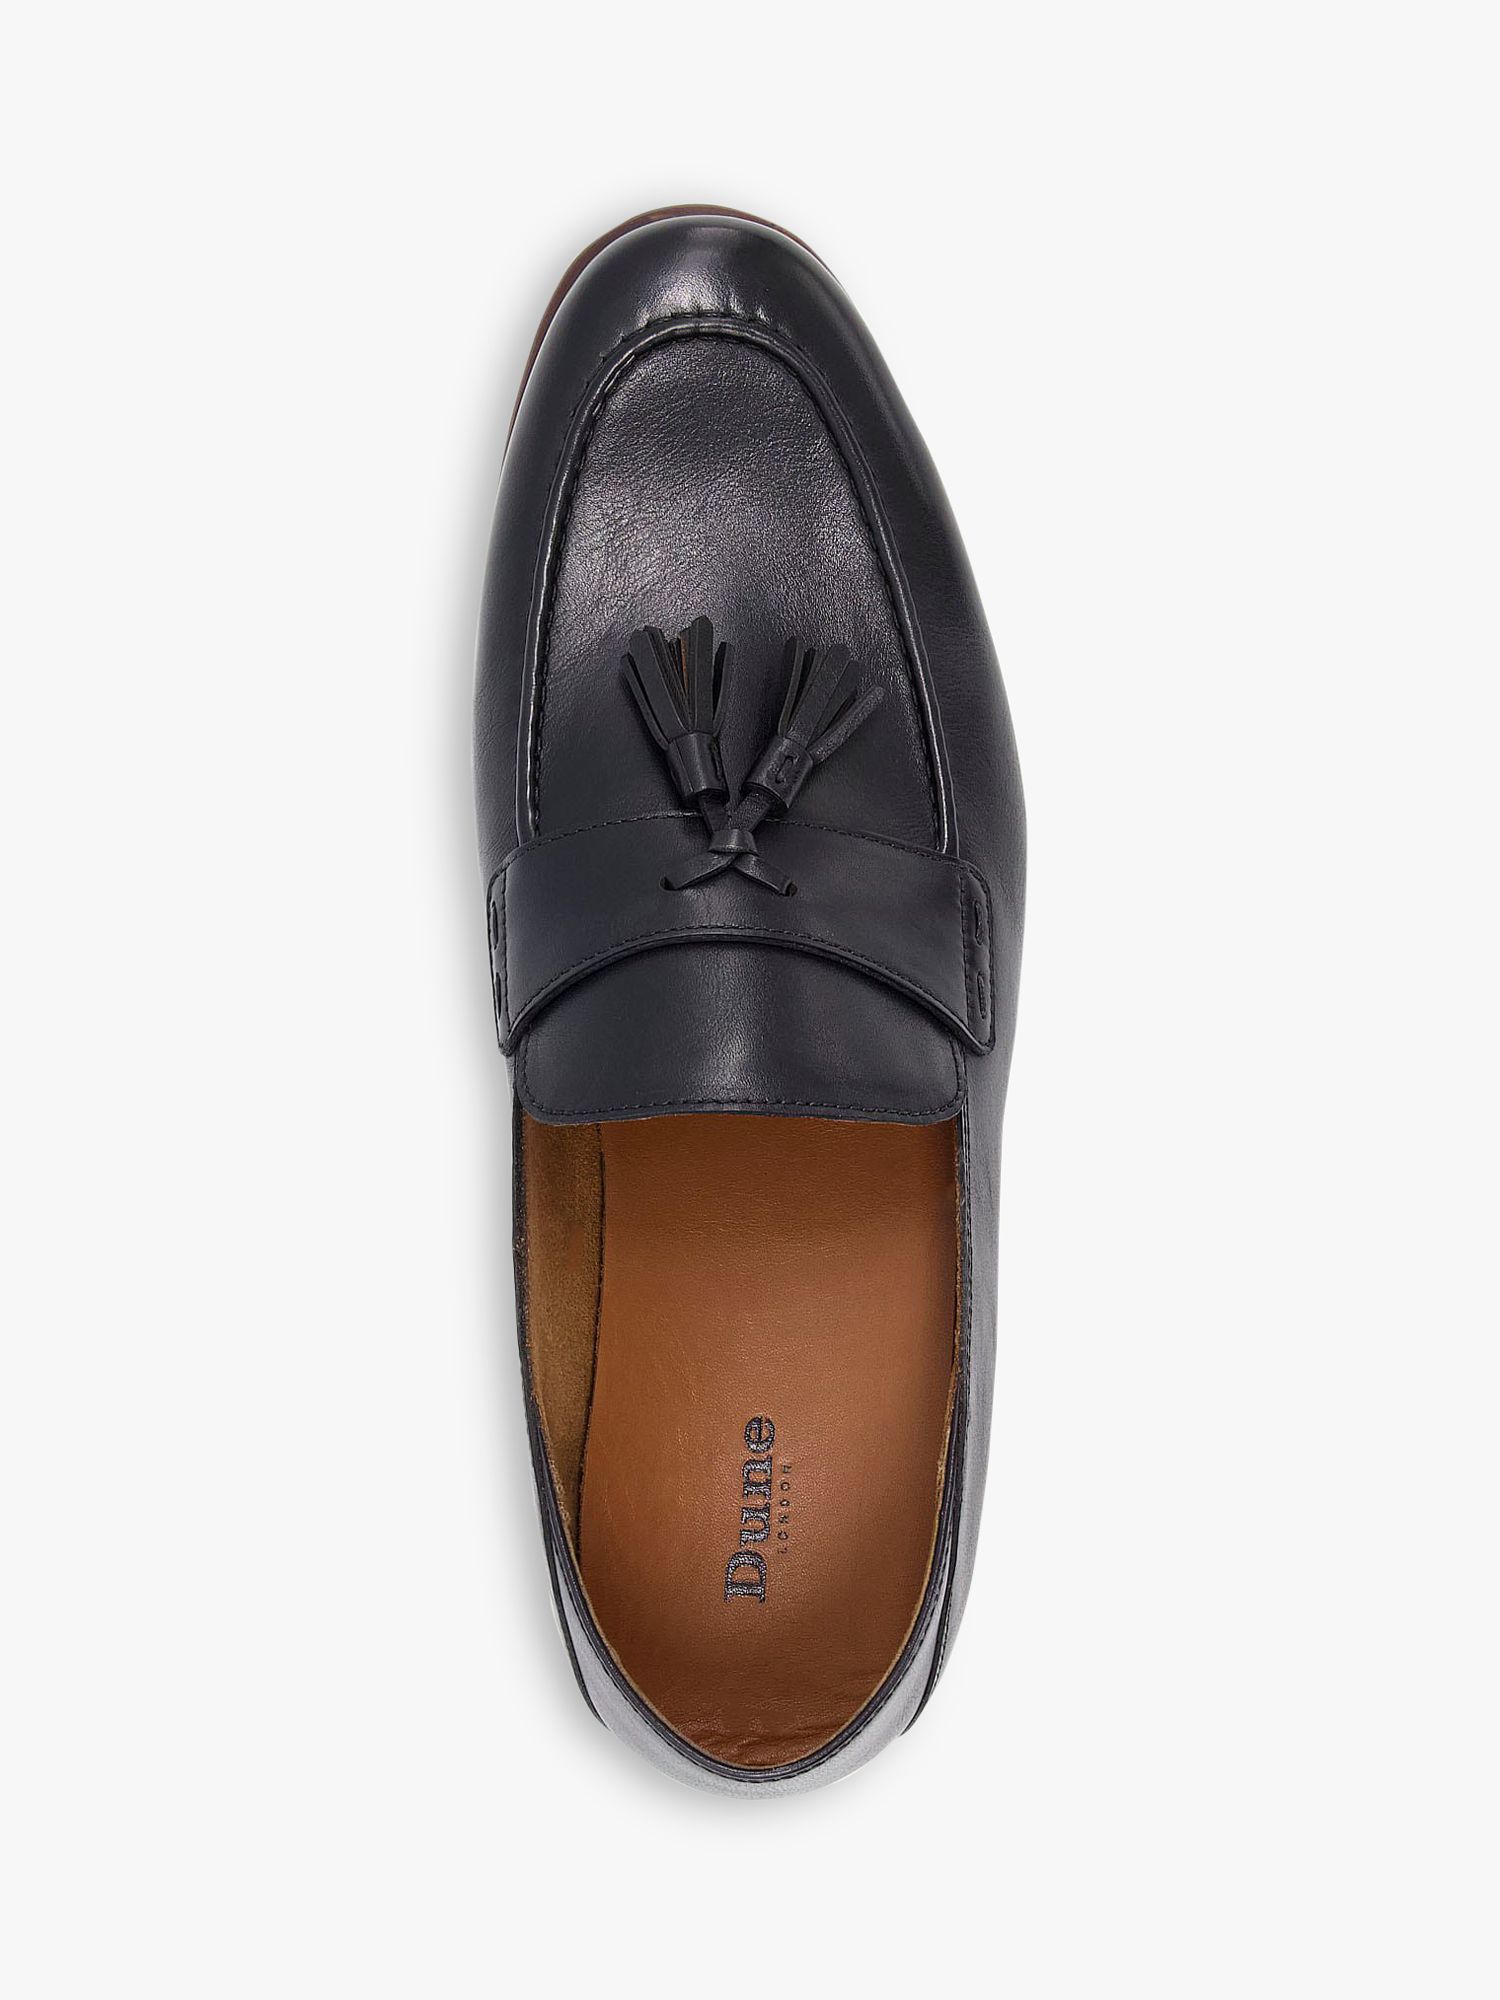 Dune Support Leather Tassel Loafers, Black at John Lewis & Partners